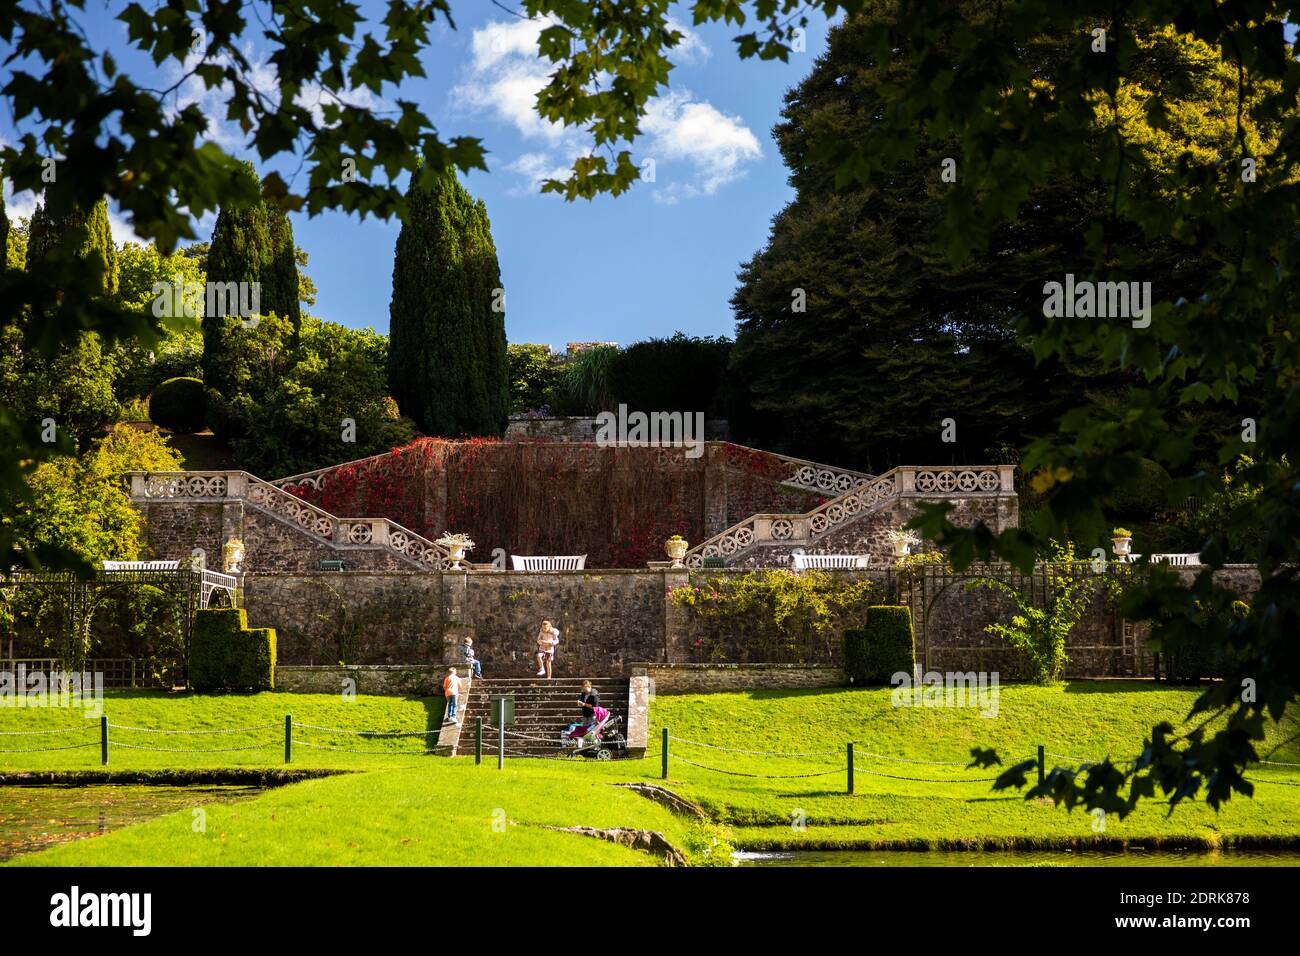 UK, Wales, Cardiff, St Fagans, National Museum of History, visitors in castle formal gardens at terrace to ponds Stock Photo